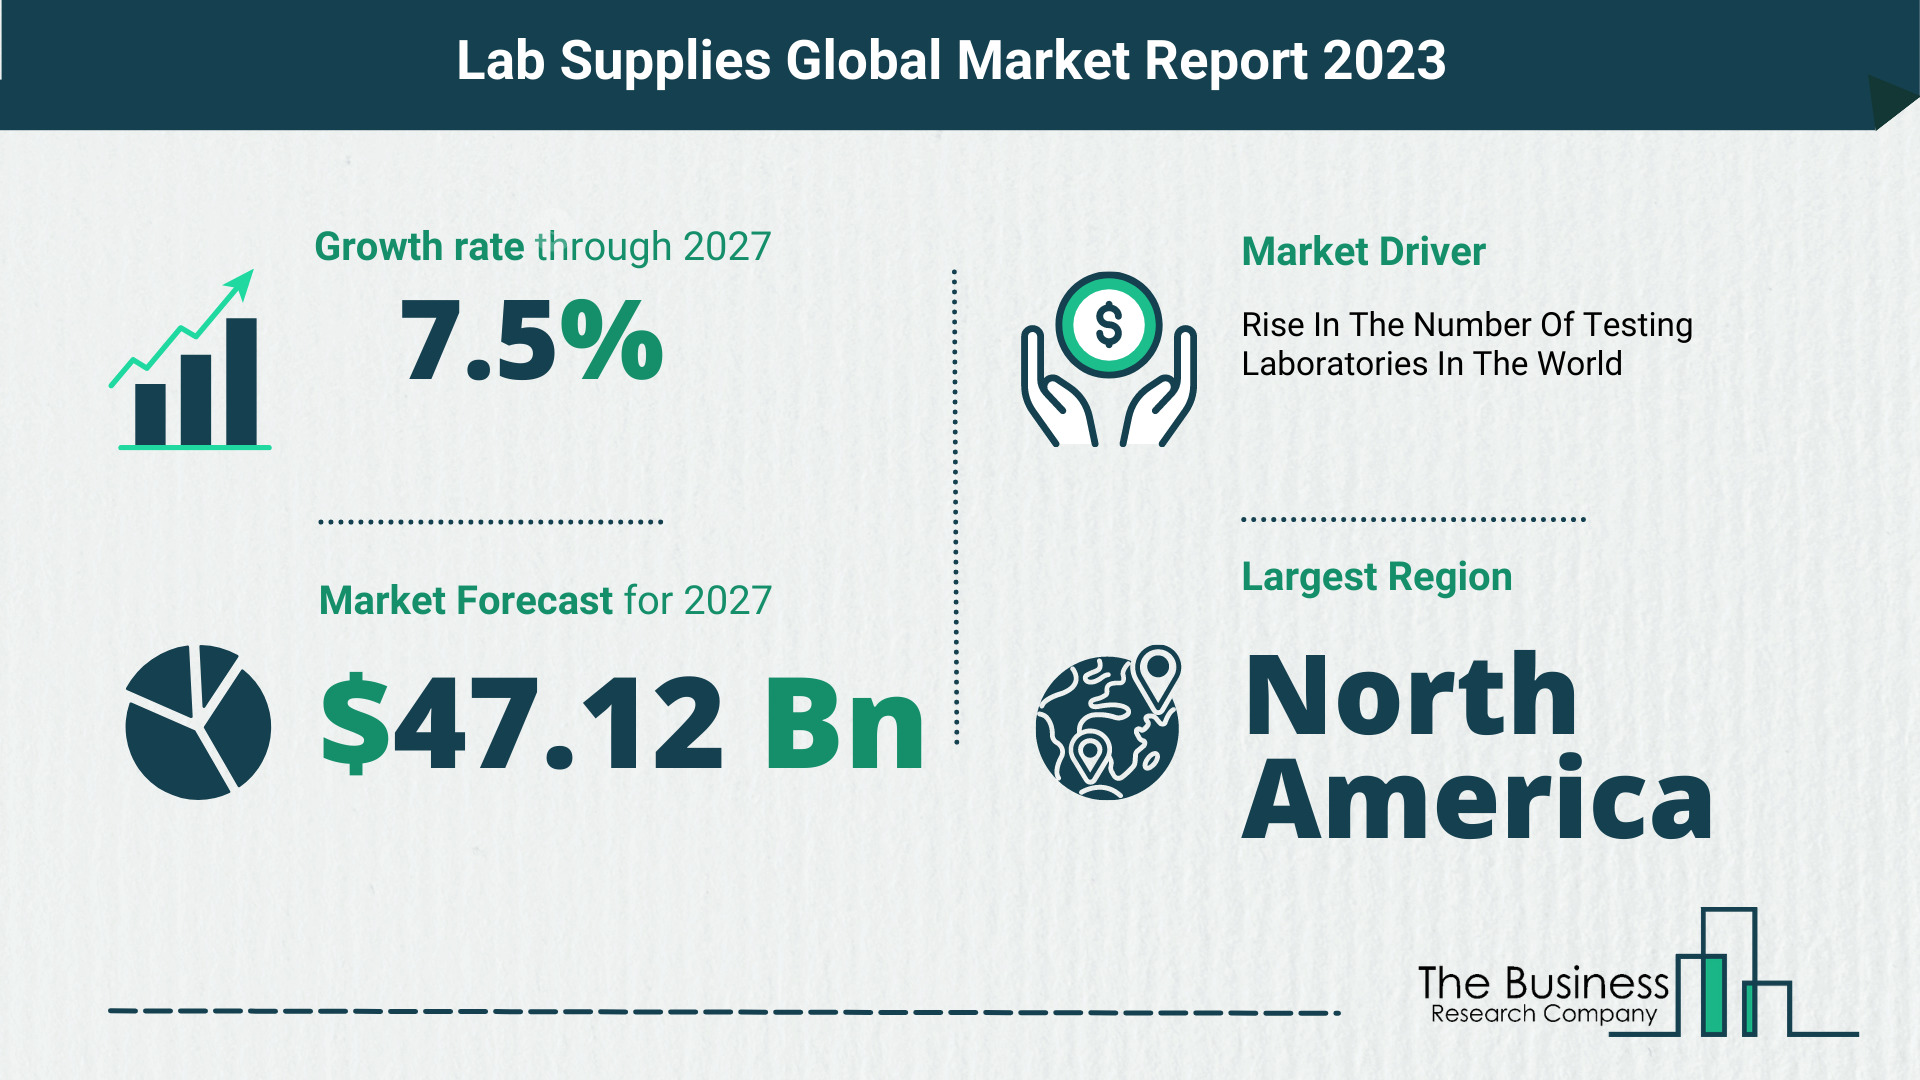 Global Lab Supplies Market Opportunities And Strategies 2023